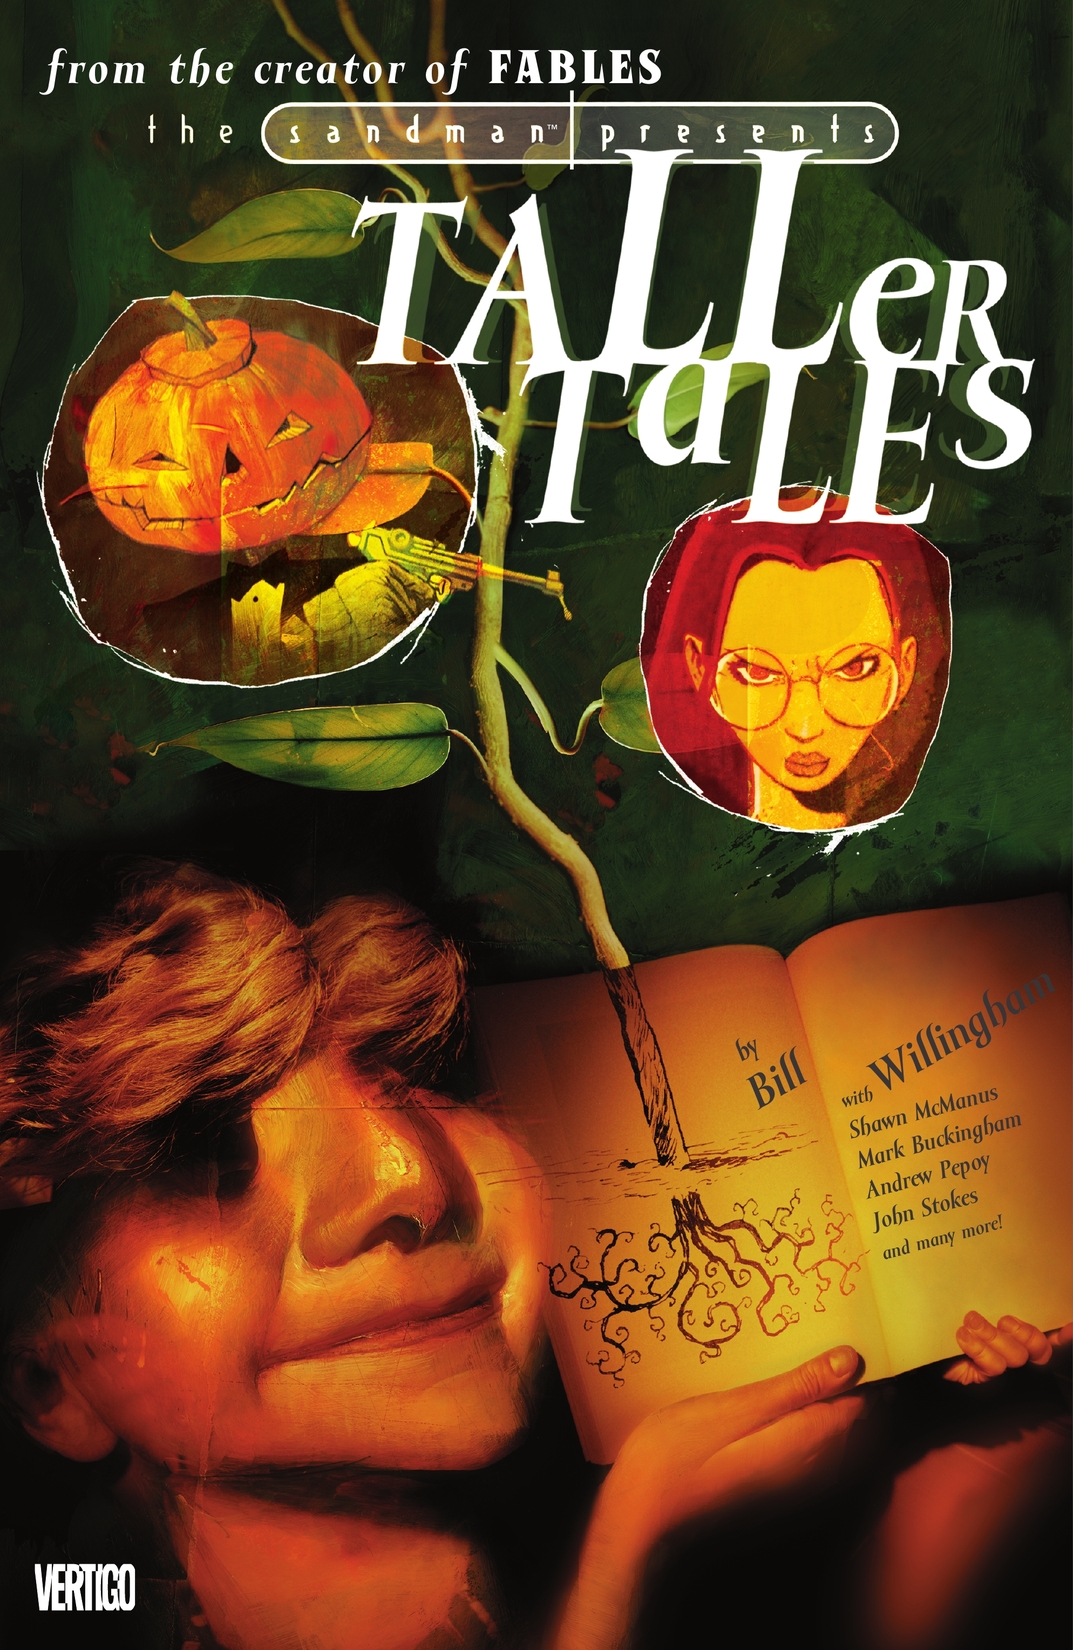 Sandman Presents: The Taller Tales preview images